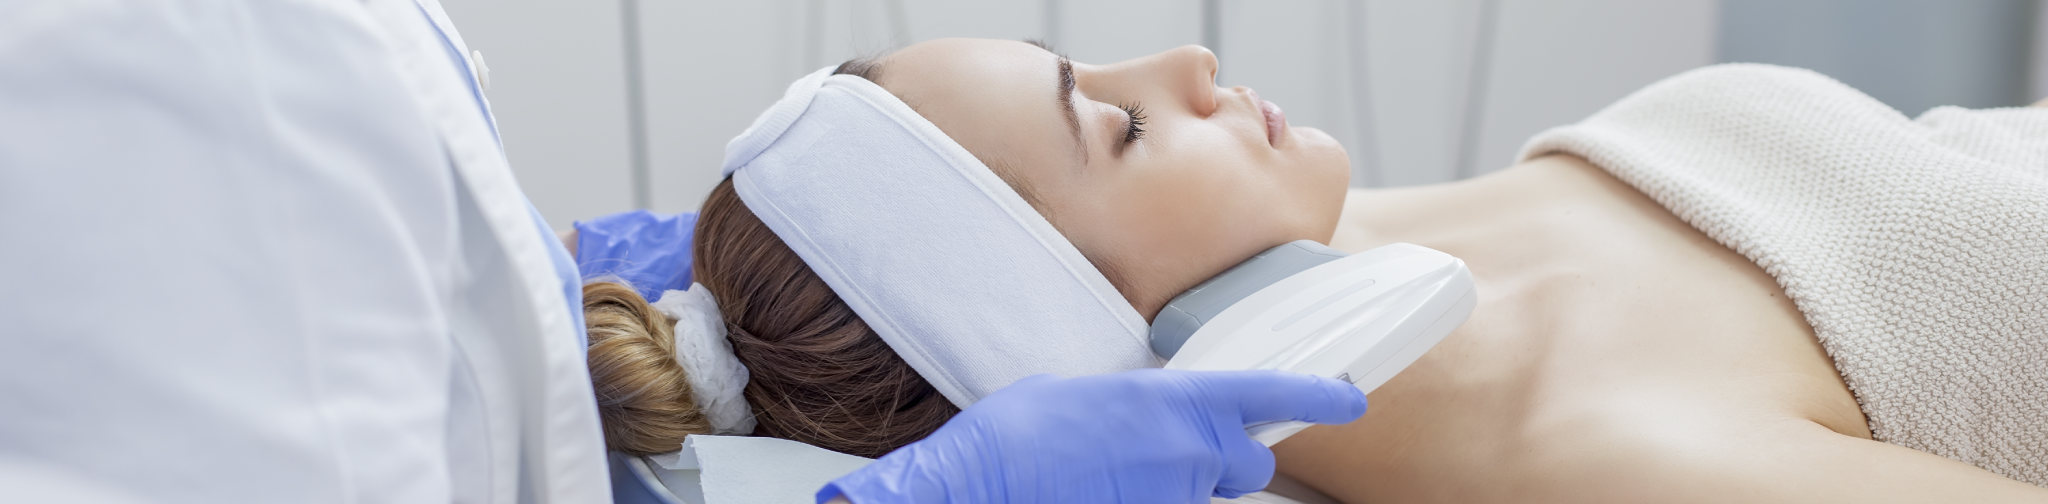 A Look at Laser Treatments